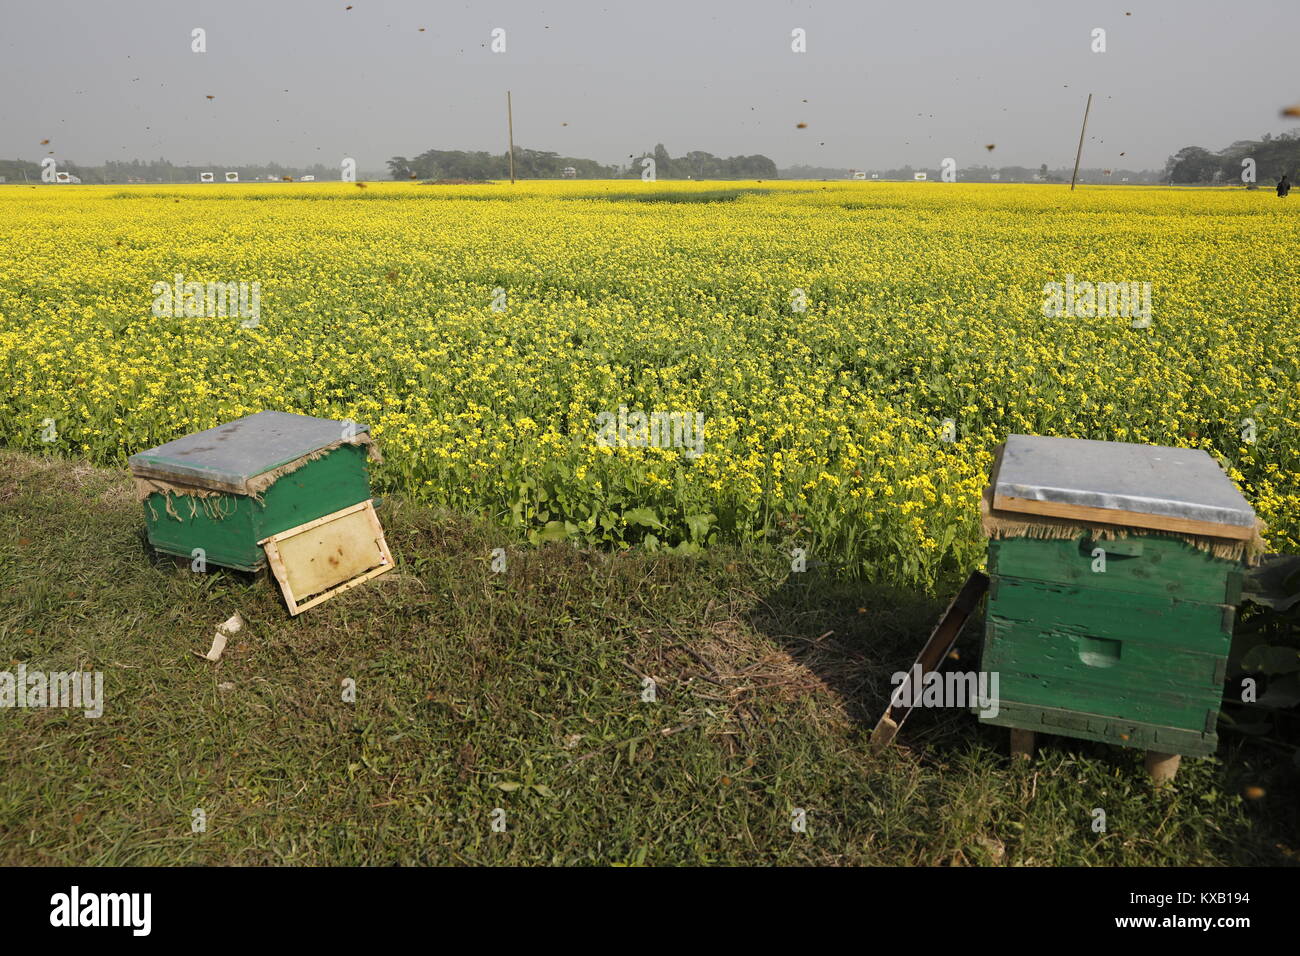 Farmers set up specially prepared box around mustard field in Munshigonj, Bangladesh, on January 09, 2018. According to the Bangladesh Institute of Apiculture (BIA), around 25 thousand cultivators including 1,000 commercial agriculturists produce at least 1500 tons of good quality honey a year across the country. Stock Photo